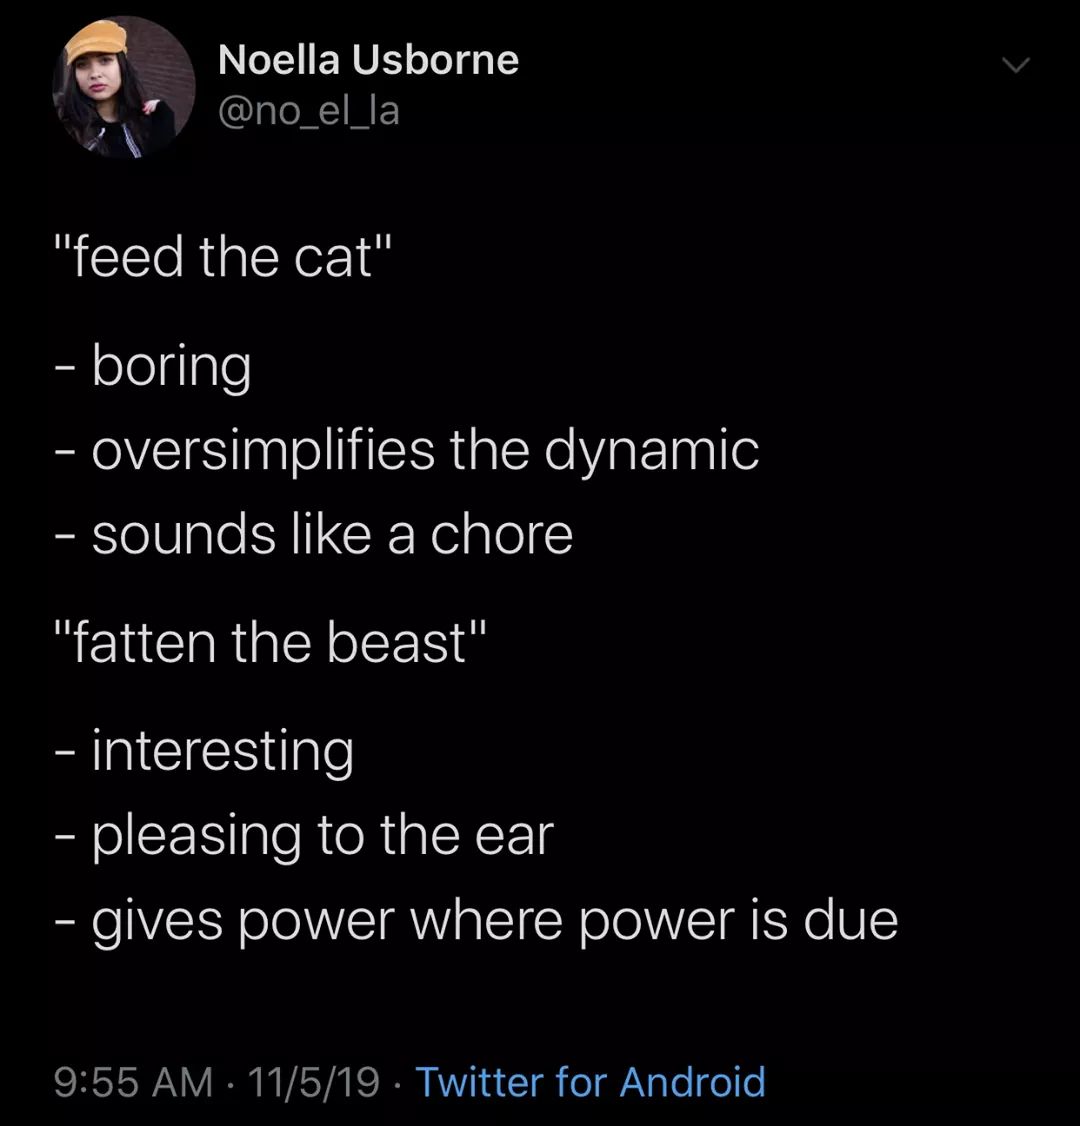 atmosphere - Noella Usborne "feed the cat" boring oversimplifies the dynamic sounds a chore Co "fatten the beast" interesting pleasing to the ear gives power where power is due 11519. Twitter for Android,